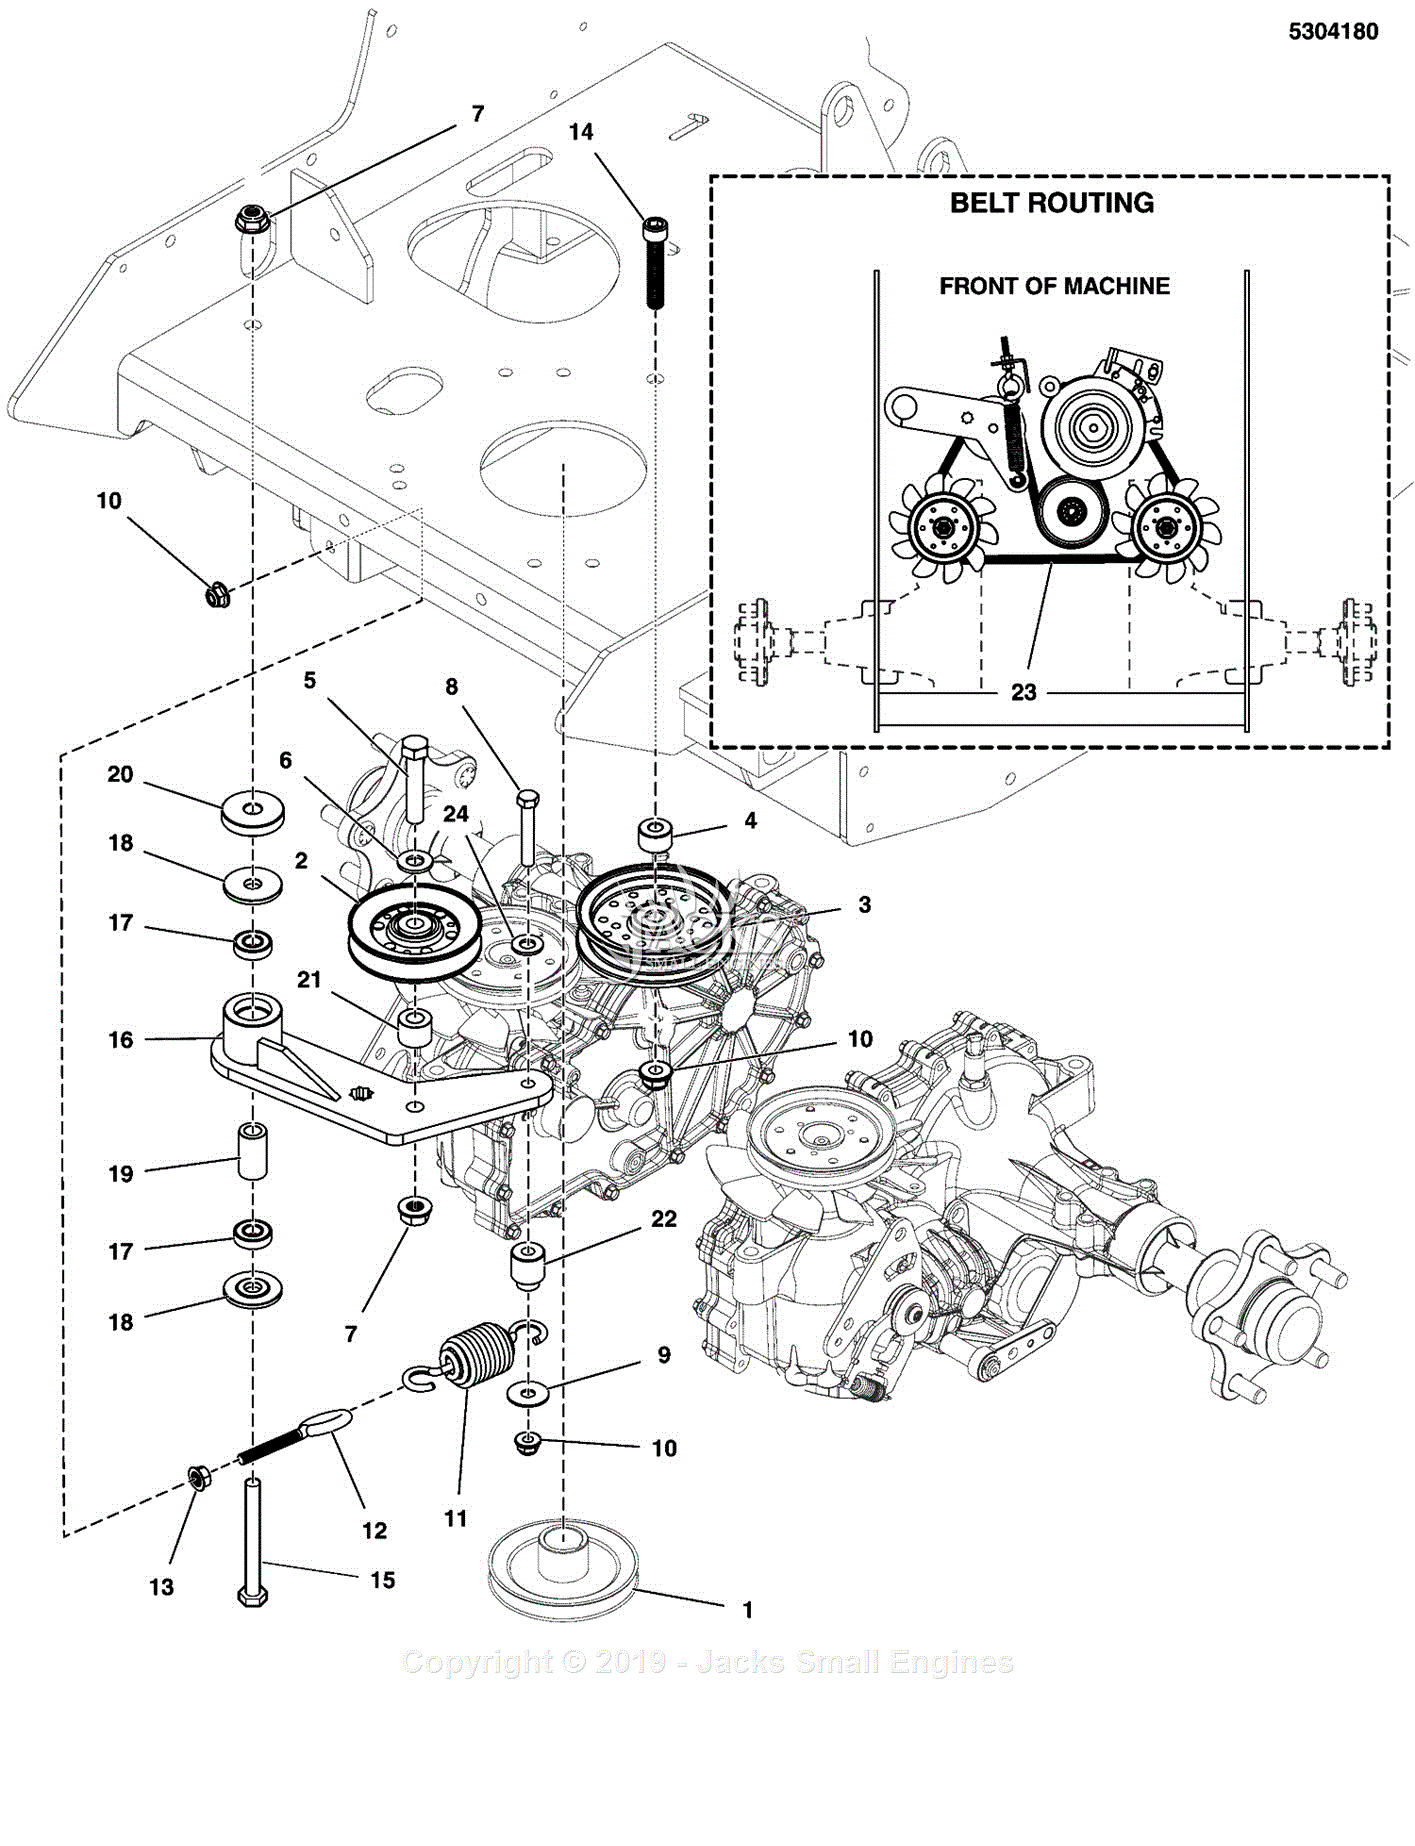 Lesco 6 Prong Ignition Switch Wiring Diagram from az417944.vo.msecnd.net